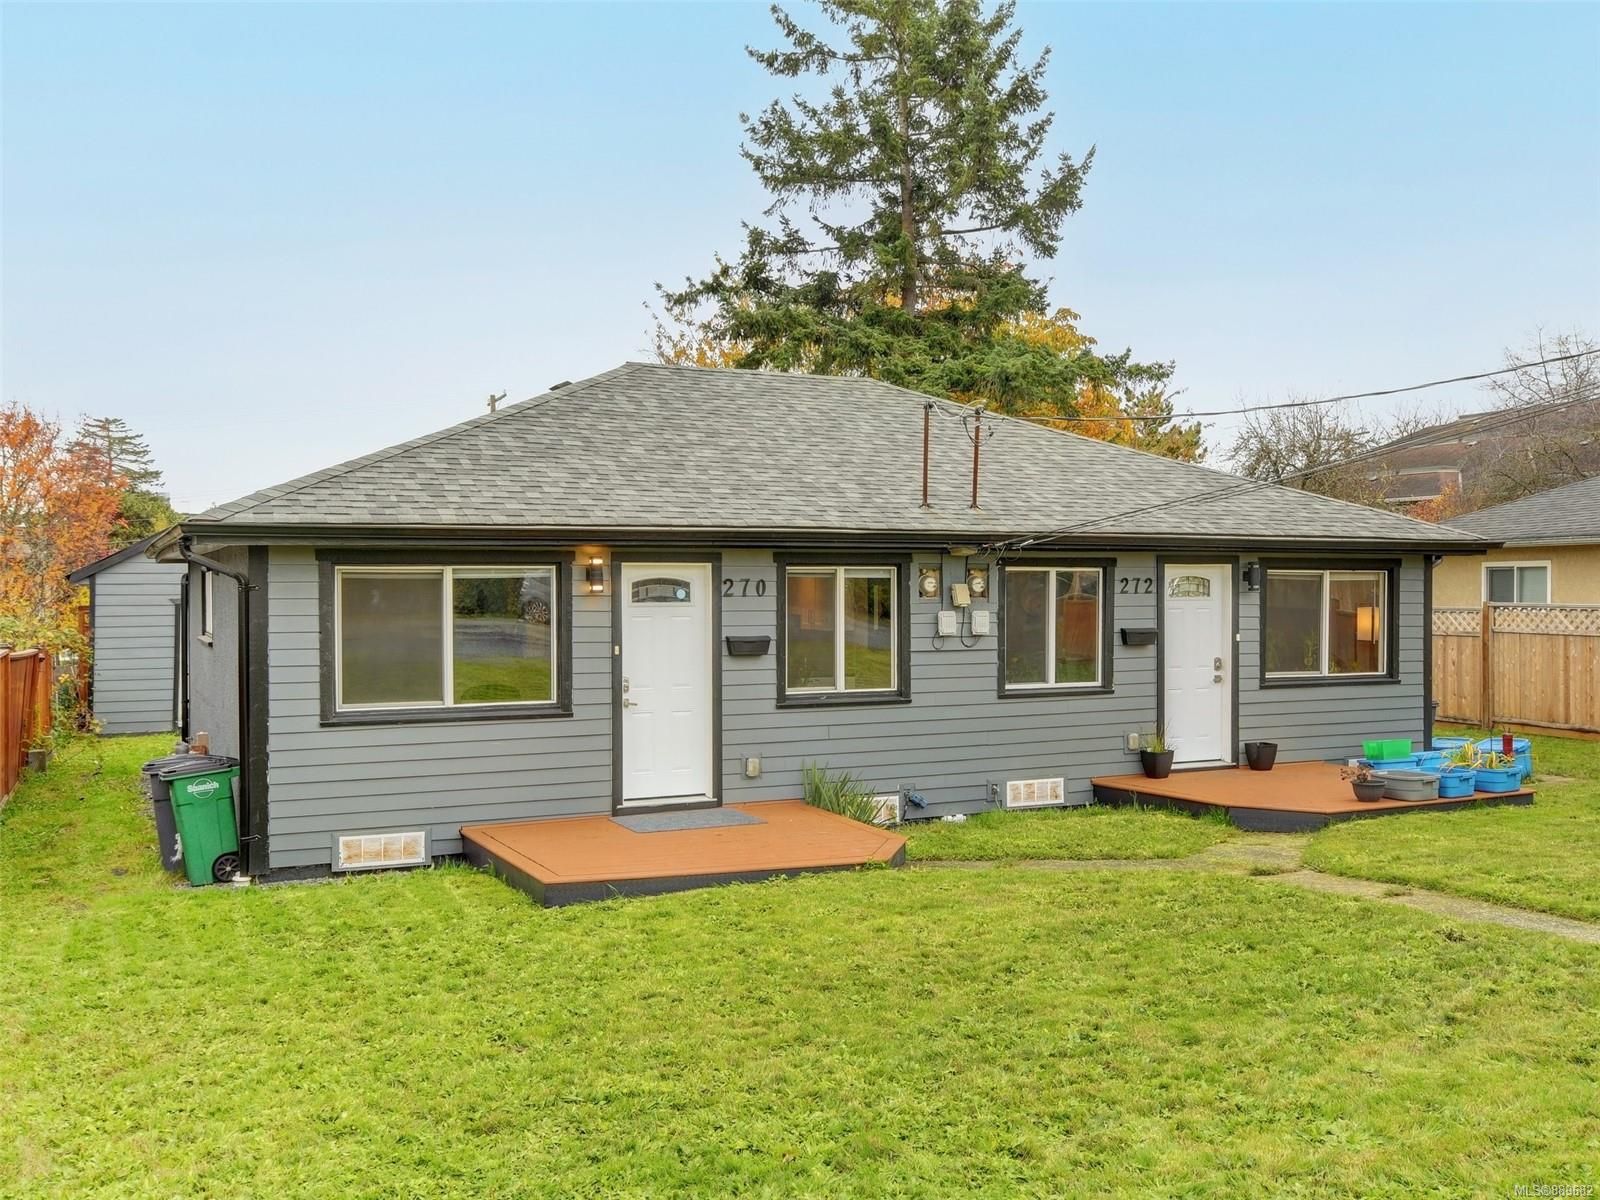 I have sold a property at 270 & 272 Tolcross Ave in Saanich
